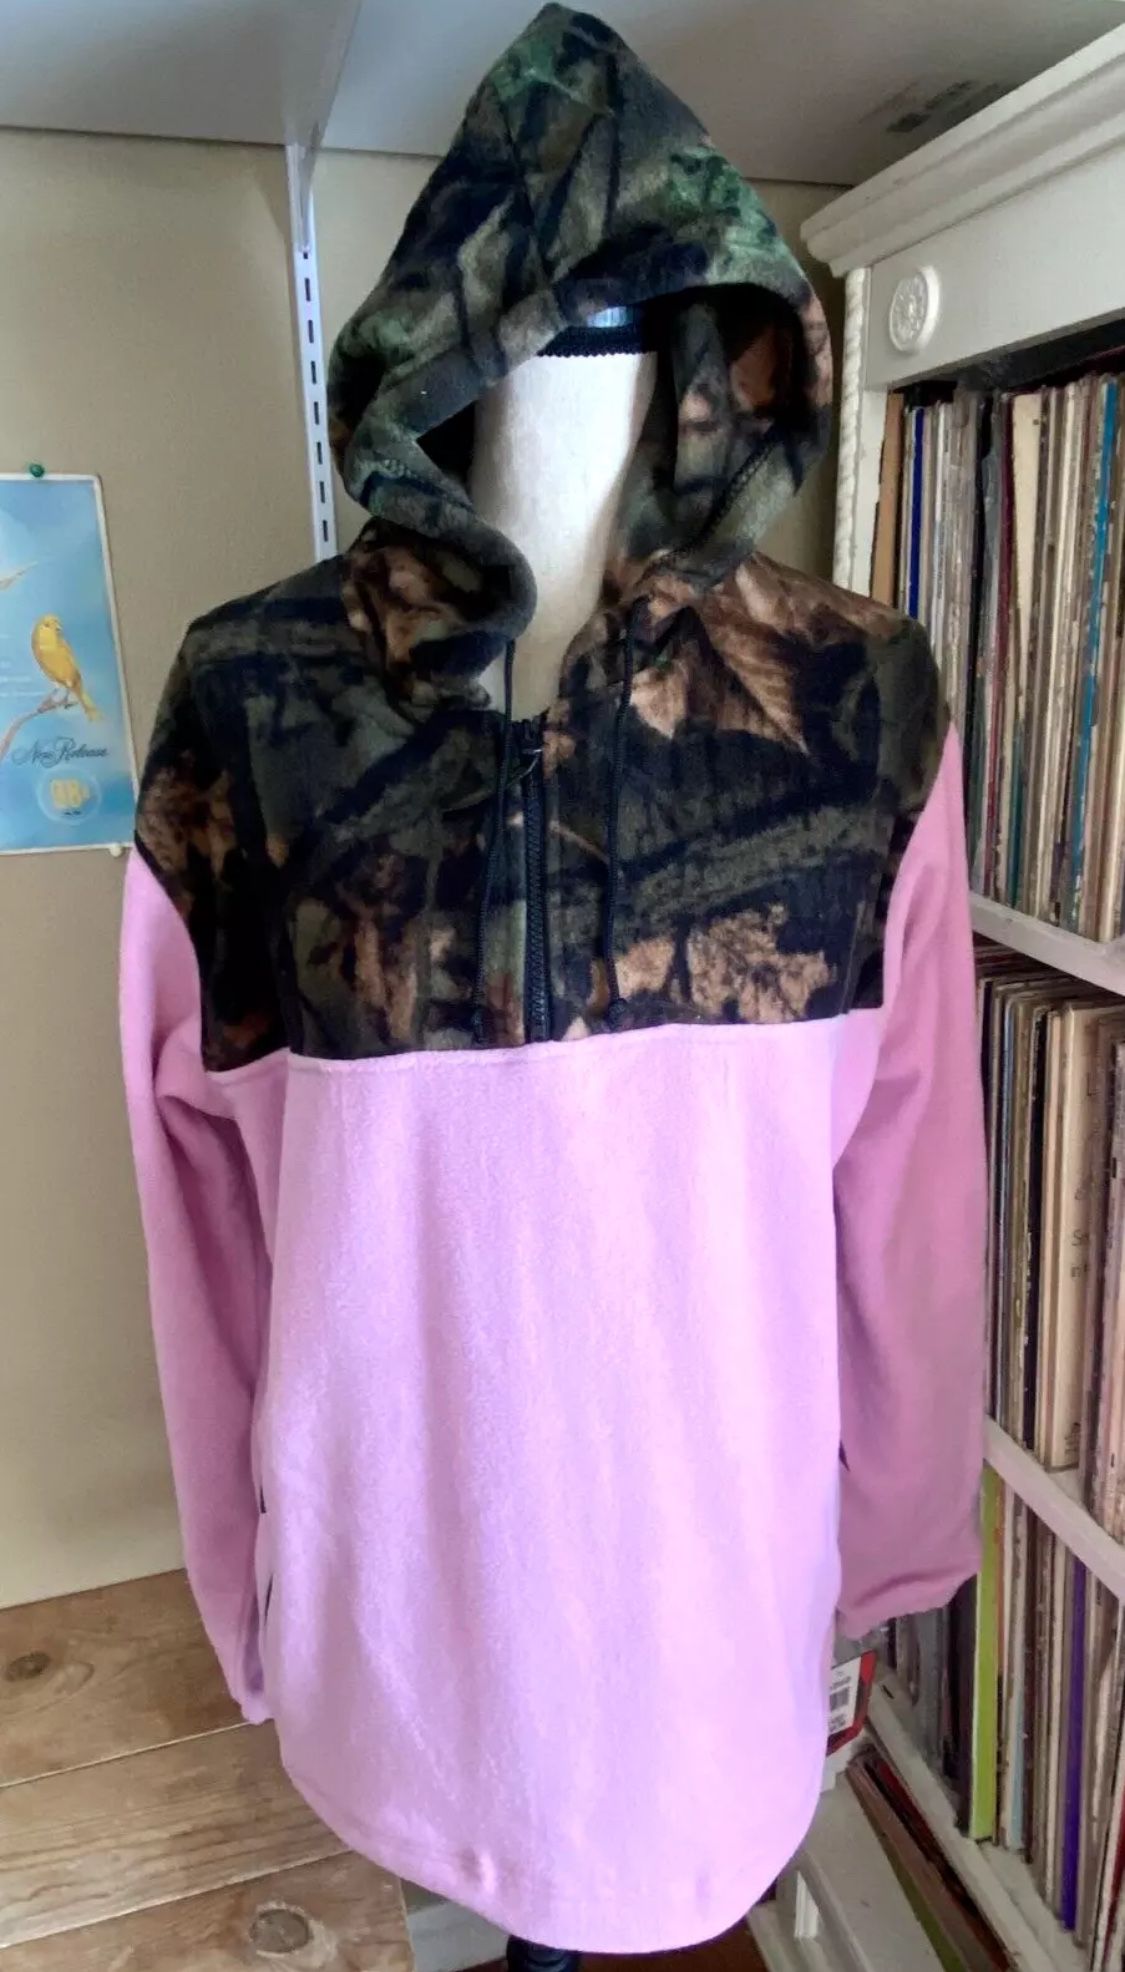 NWT Women's Trail Crest Pink Fleece Jacket Hoodie Camo Camouflage Pullover Sz L